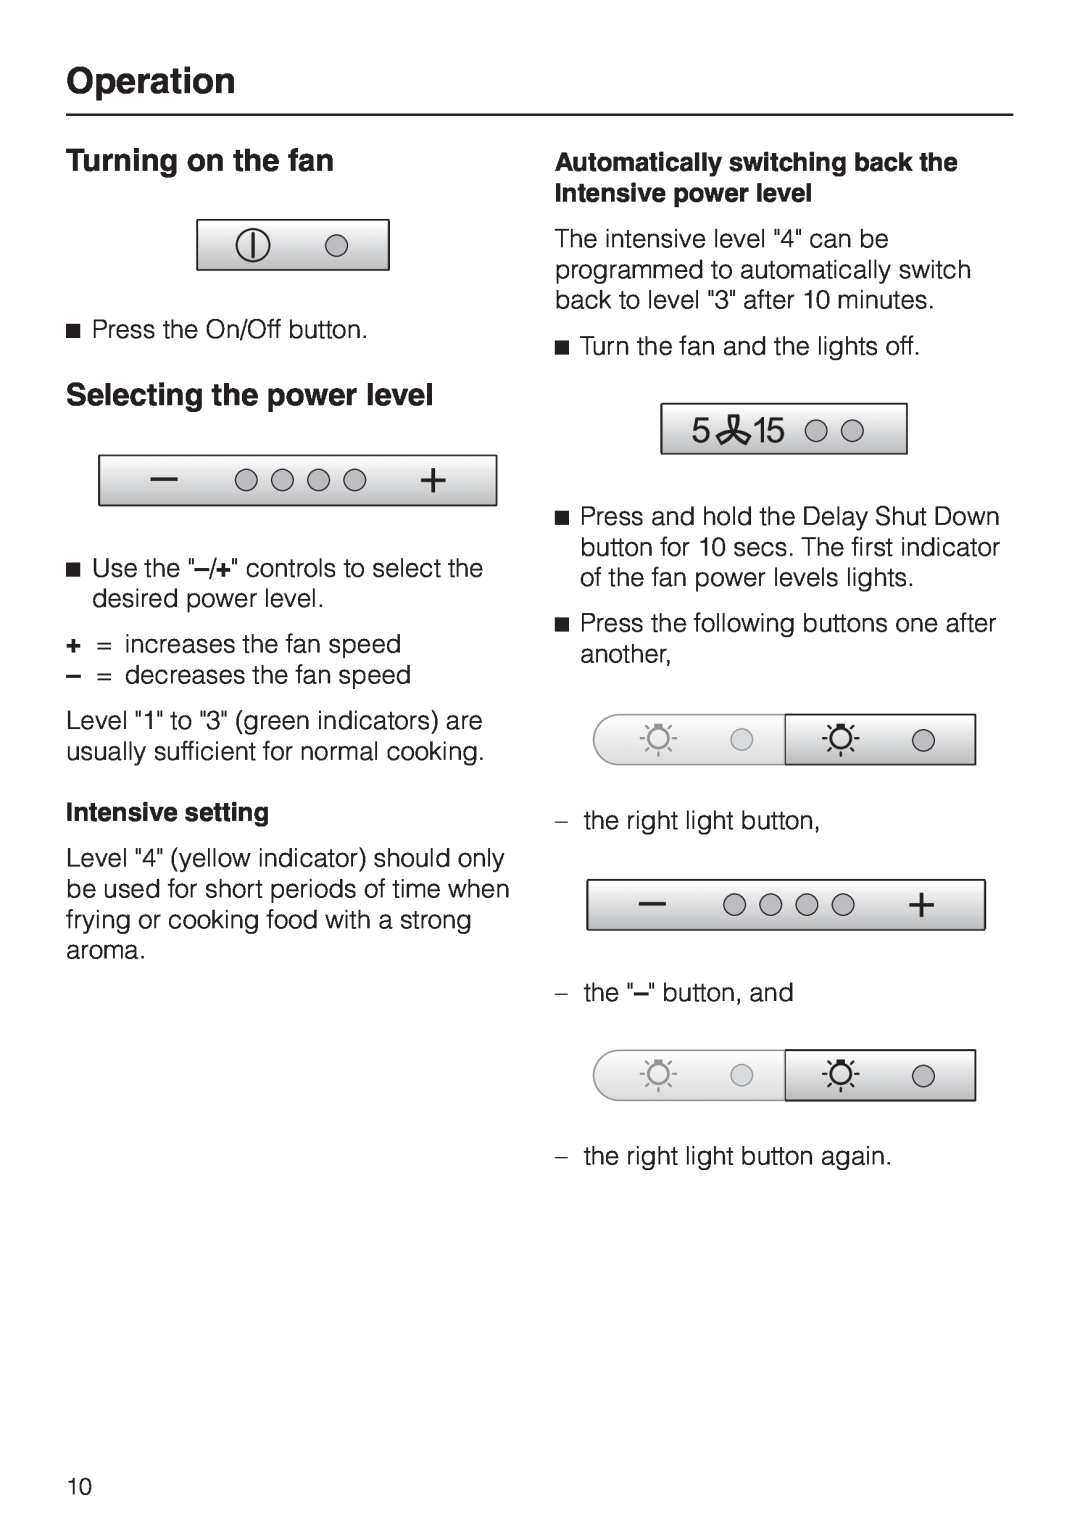 Miele DA 279-4 installation instructions Operation, Turning on the fan, Selecting the power level 